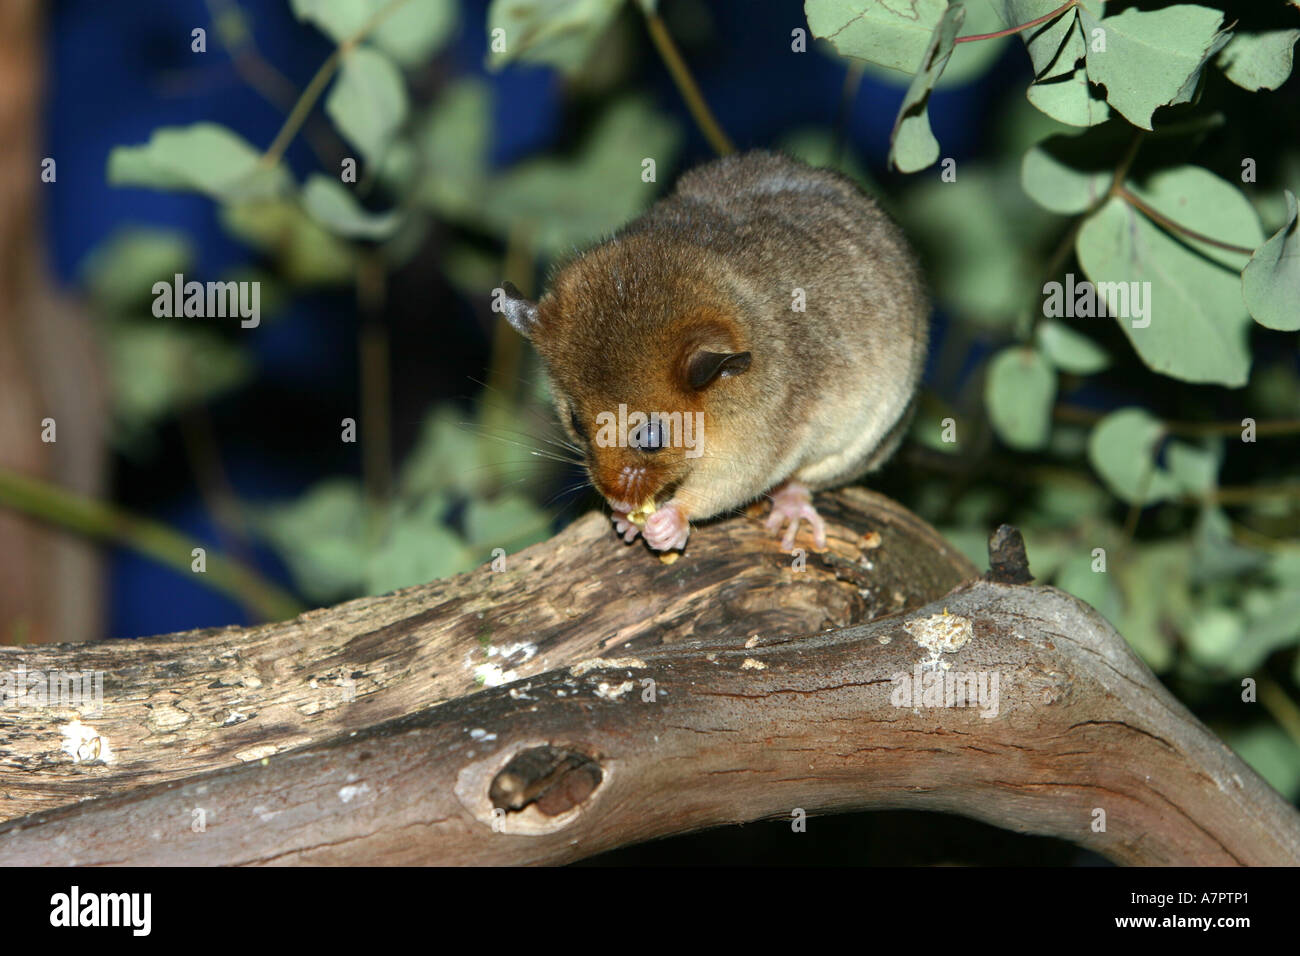 spinifex hopping mouse (Notomys alexis), sitting on a branch, feeding, Australia, Victoria Stock Photo